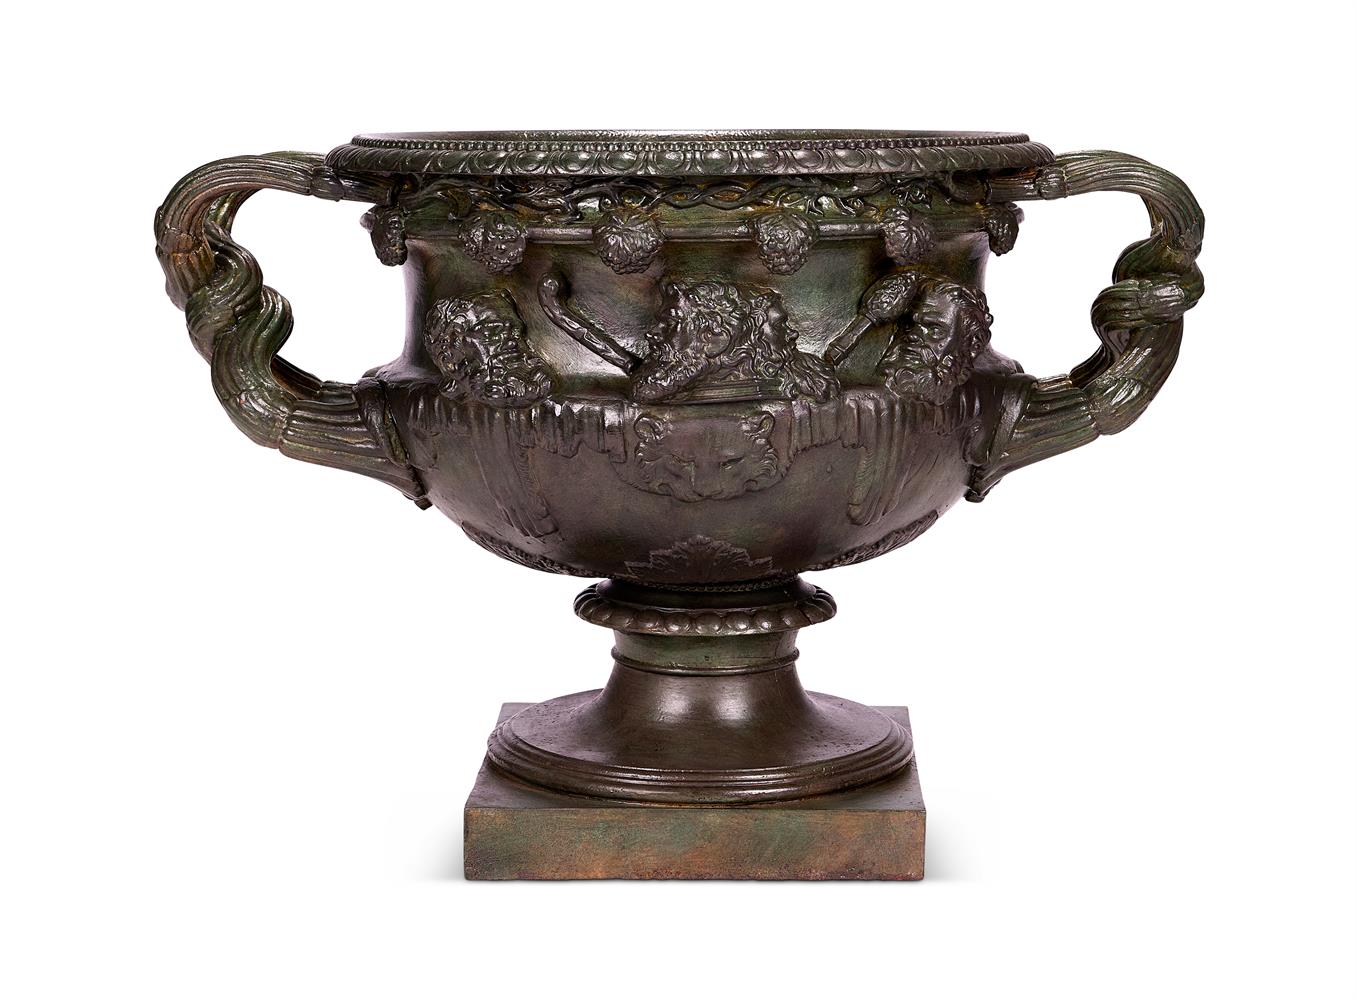 AFTER THE ANTIQUE, AN IMPRESSIVE PATINATED CAST IRON WARWICK VASE, MID 19TH CENTURY